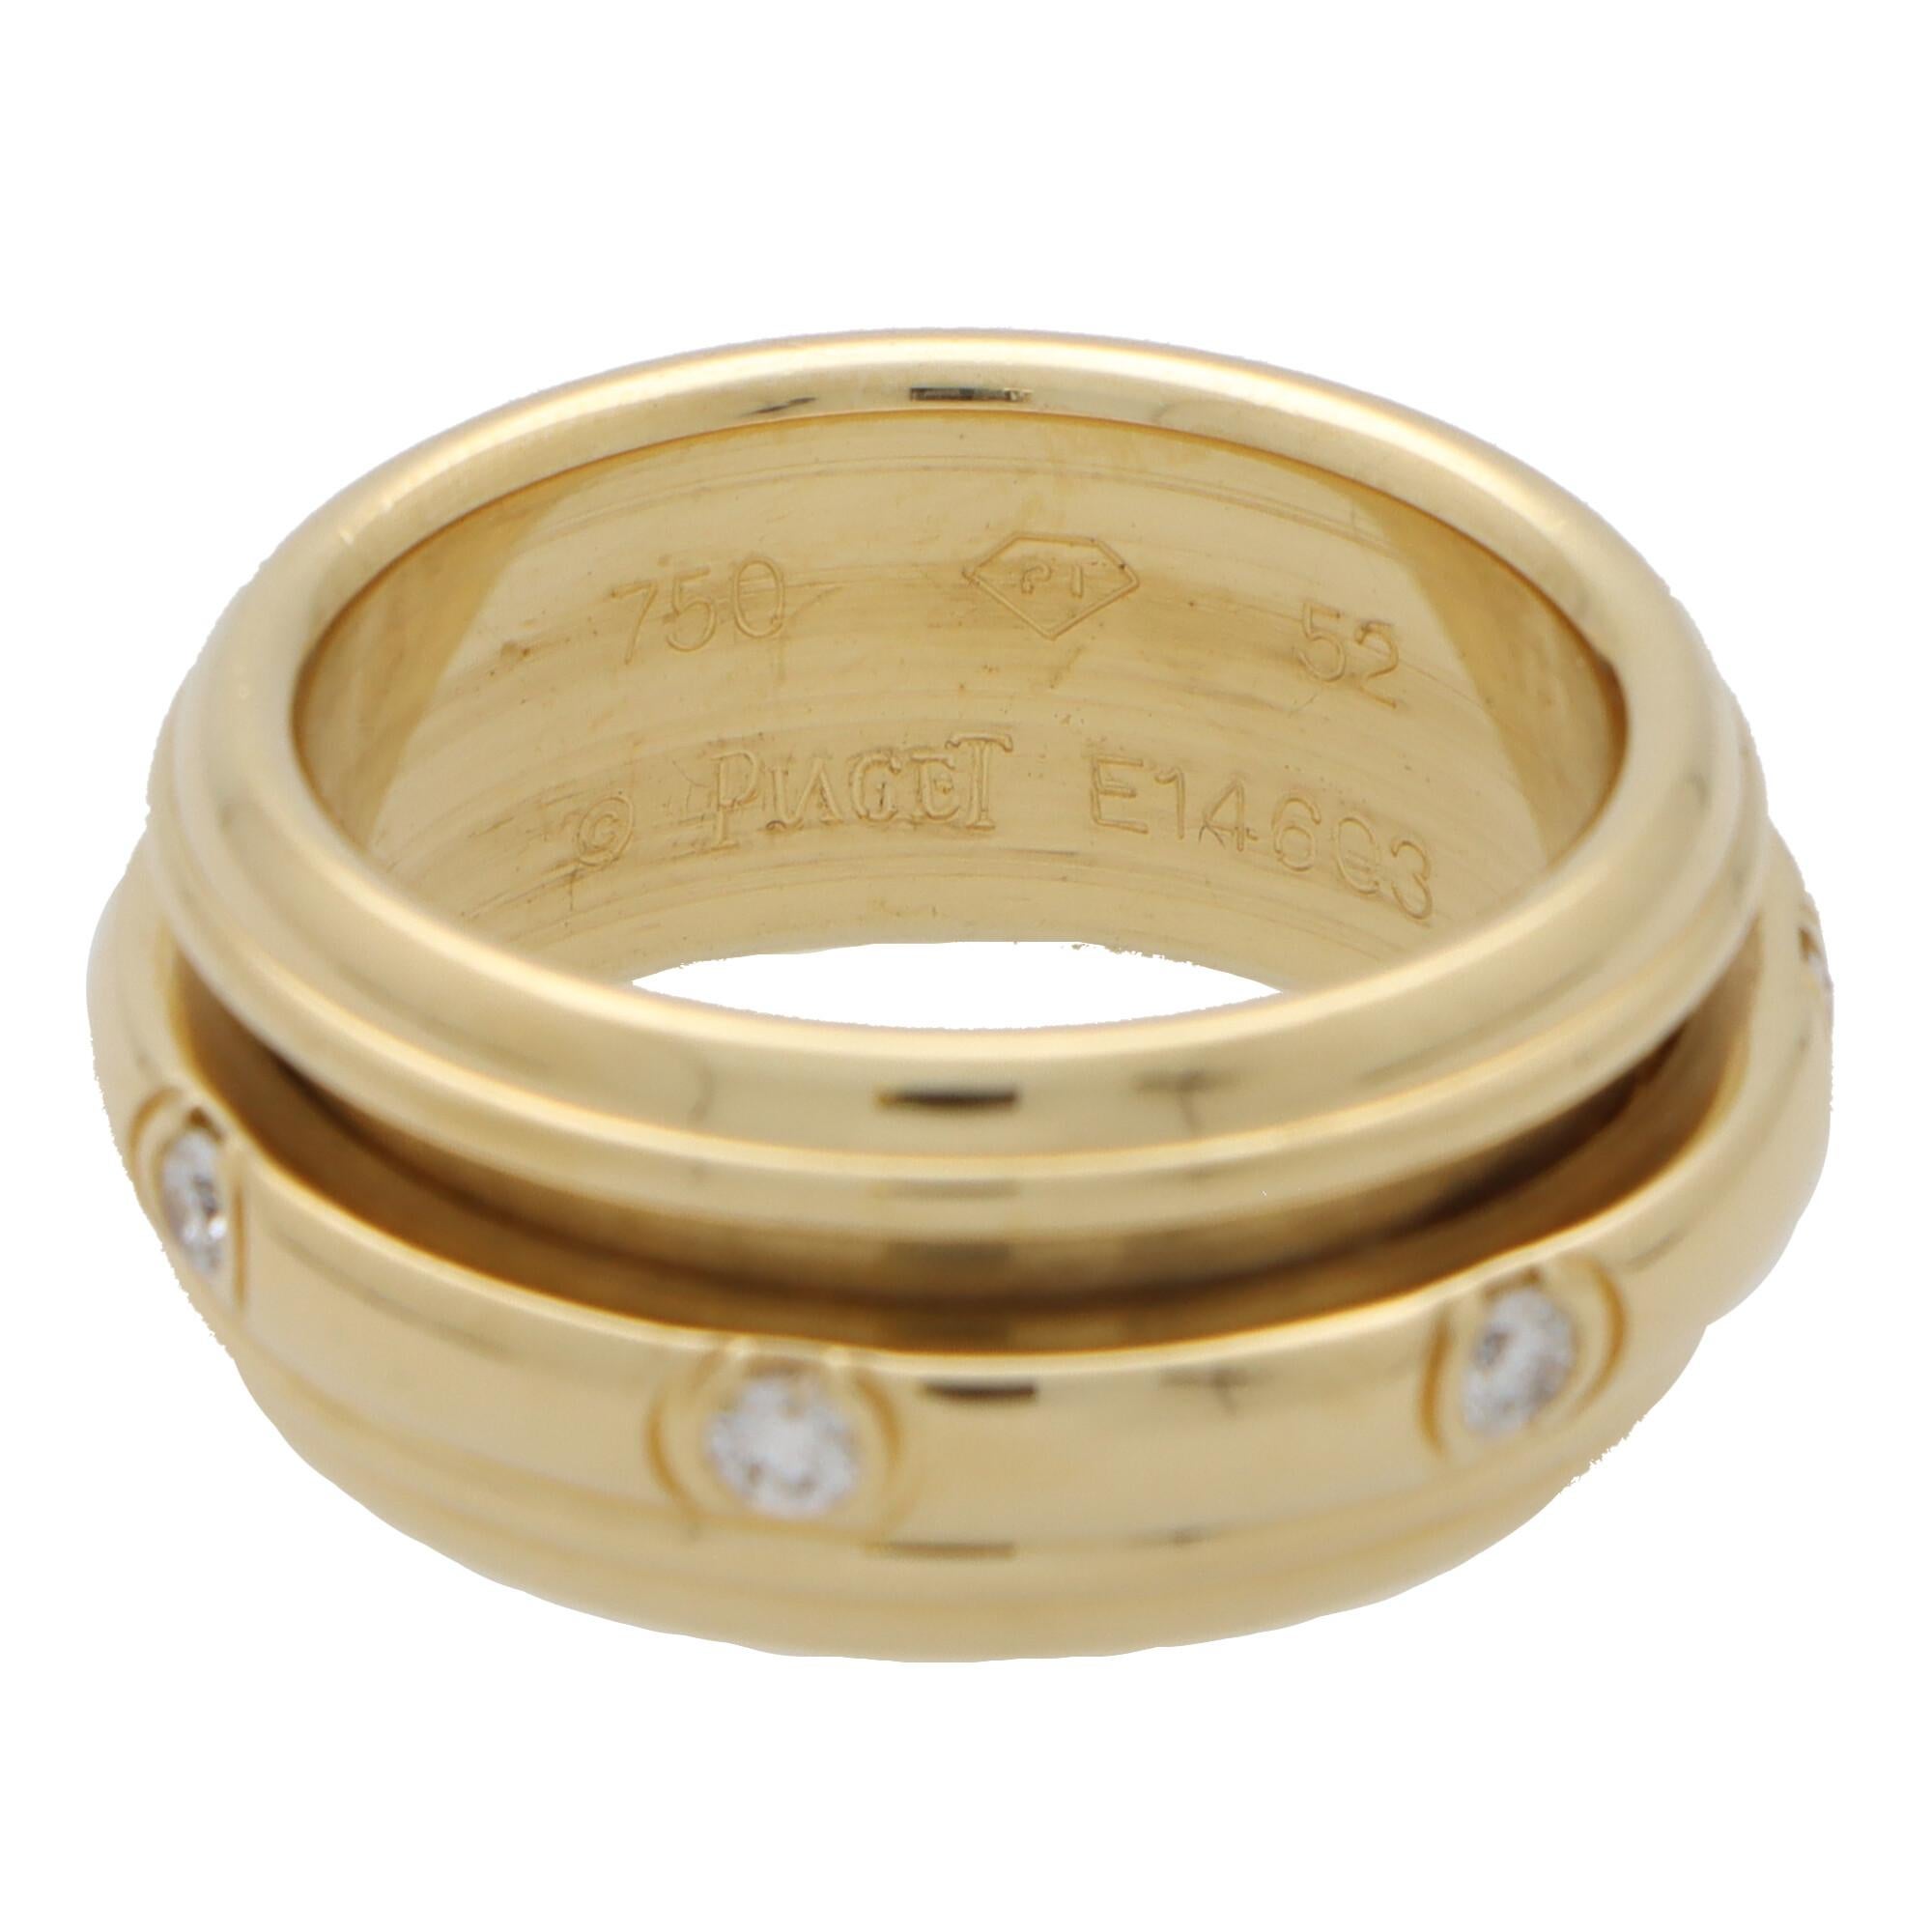 A beautiful vintage Piaget diamond band ring set in 18k yellow gold.

From the now discontinued ‘Possessions’ collection the ring is predominantly composed of an Etruscan inspired band. Set centrally to the band is another thinner band bezel set